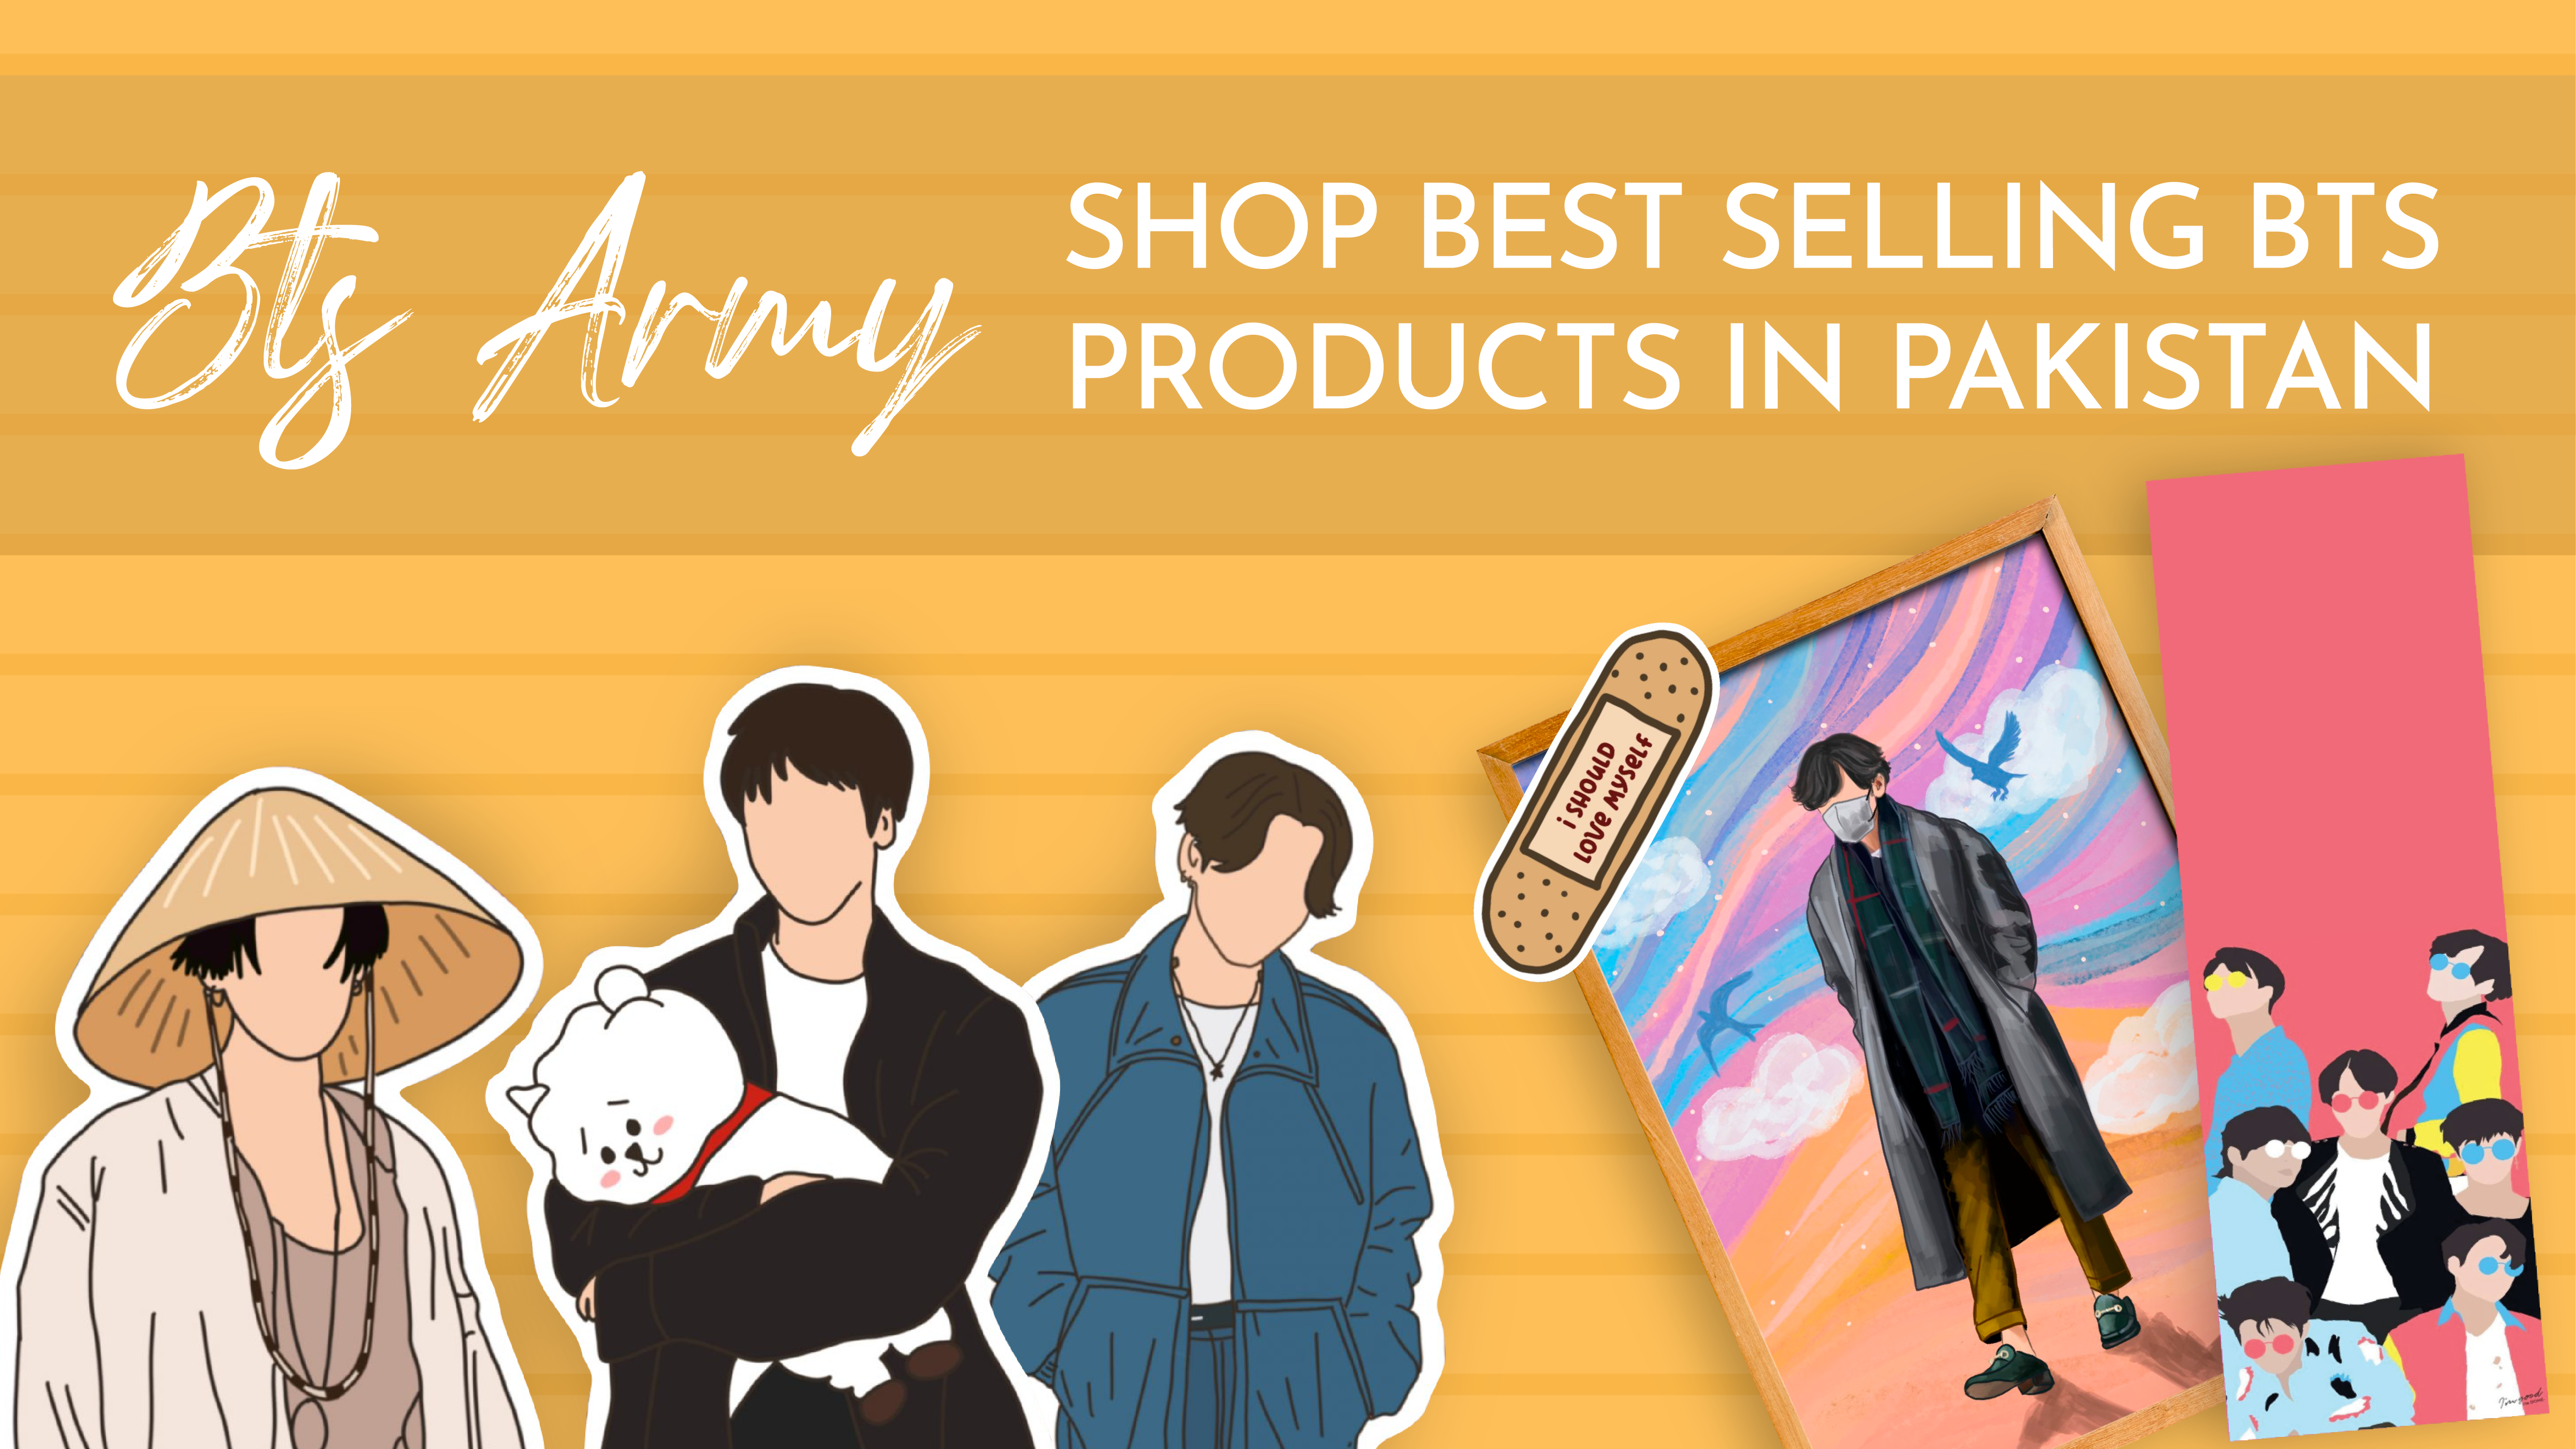 Find a collection of Beautiful BTS Products